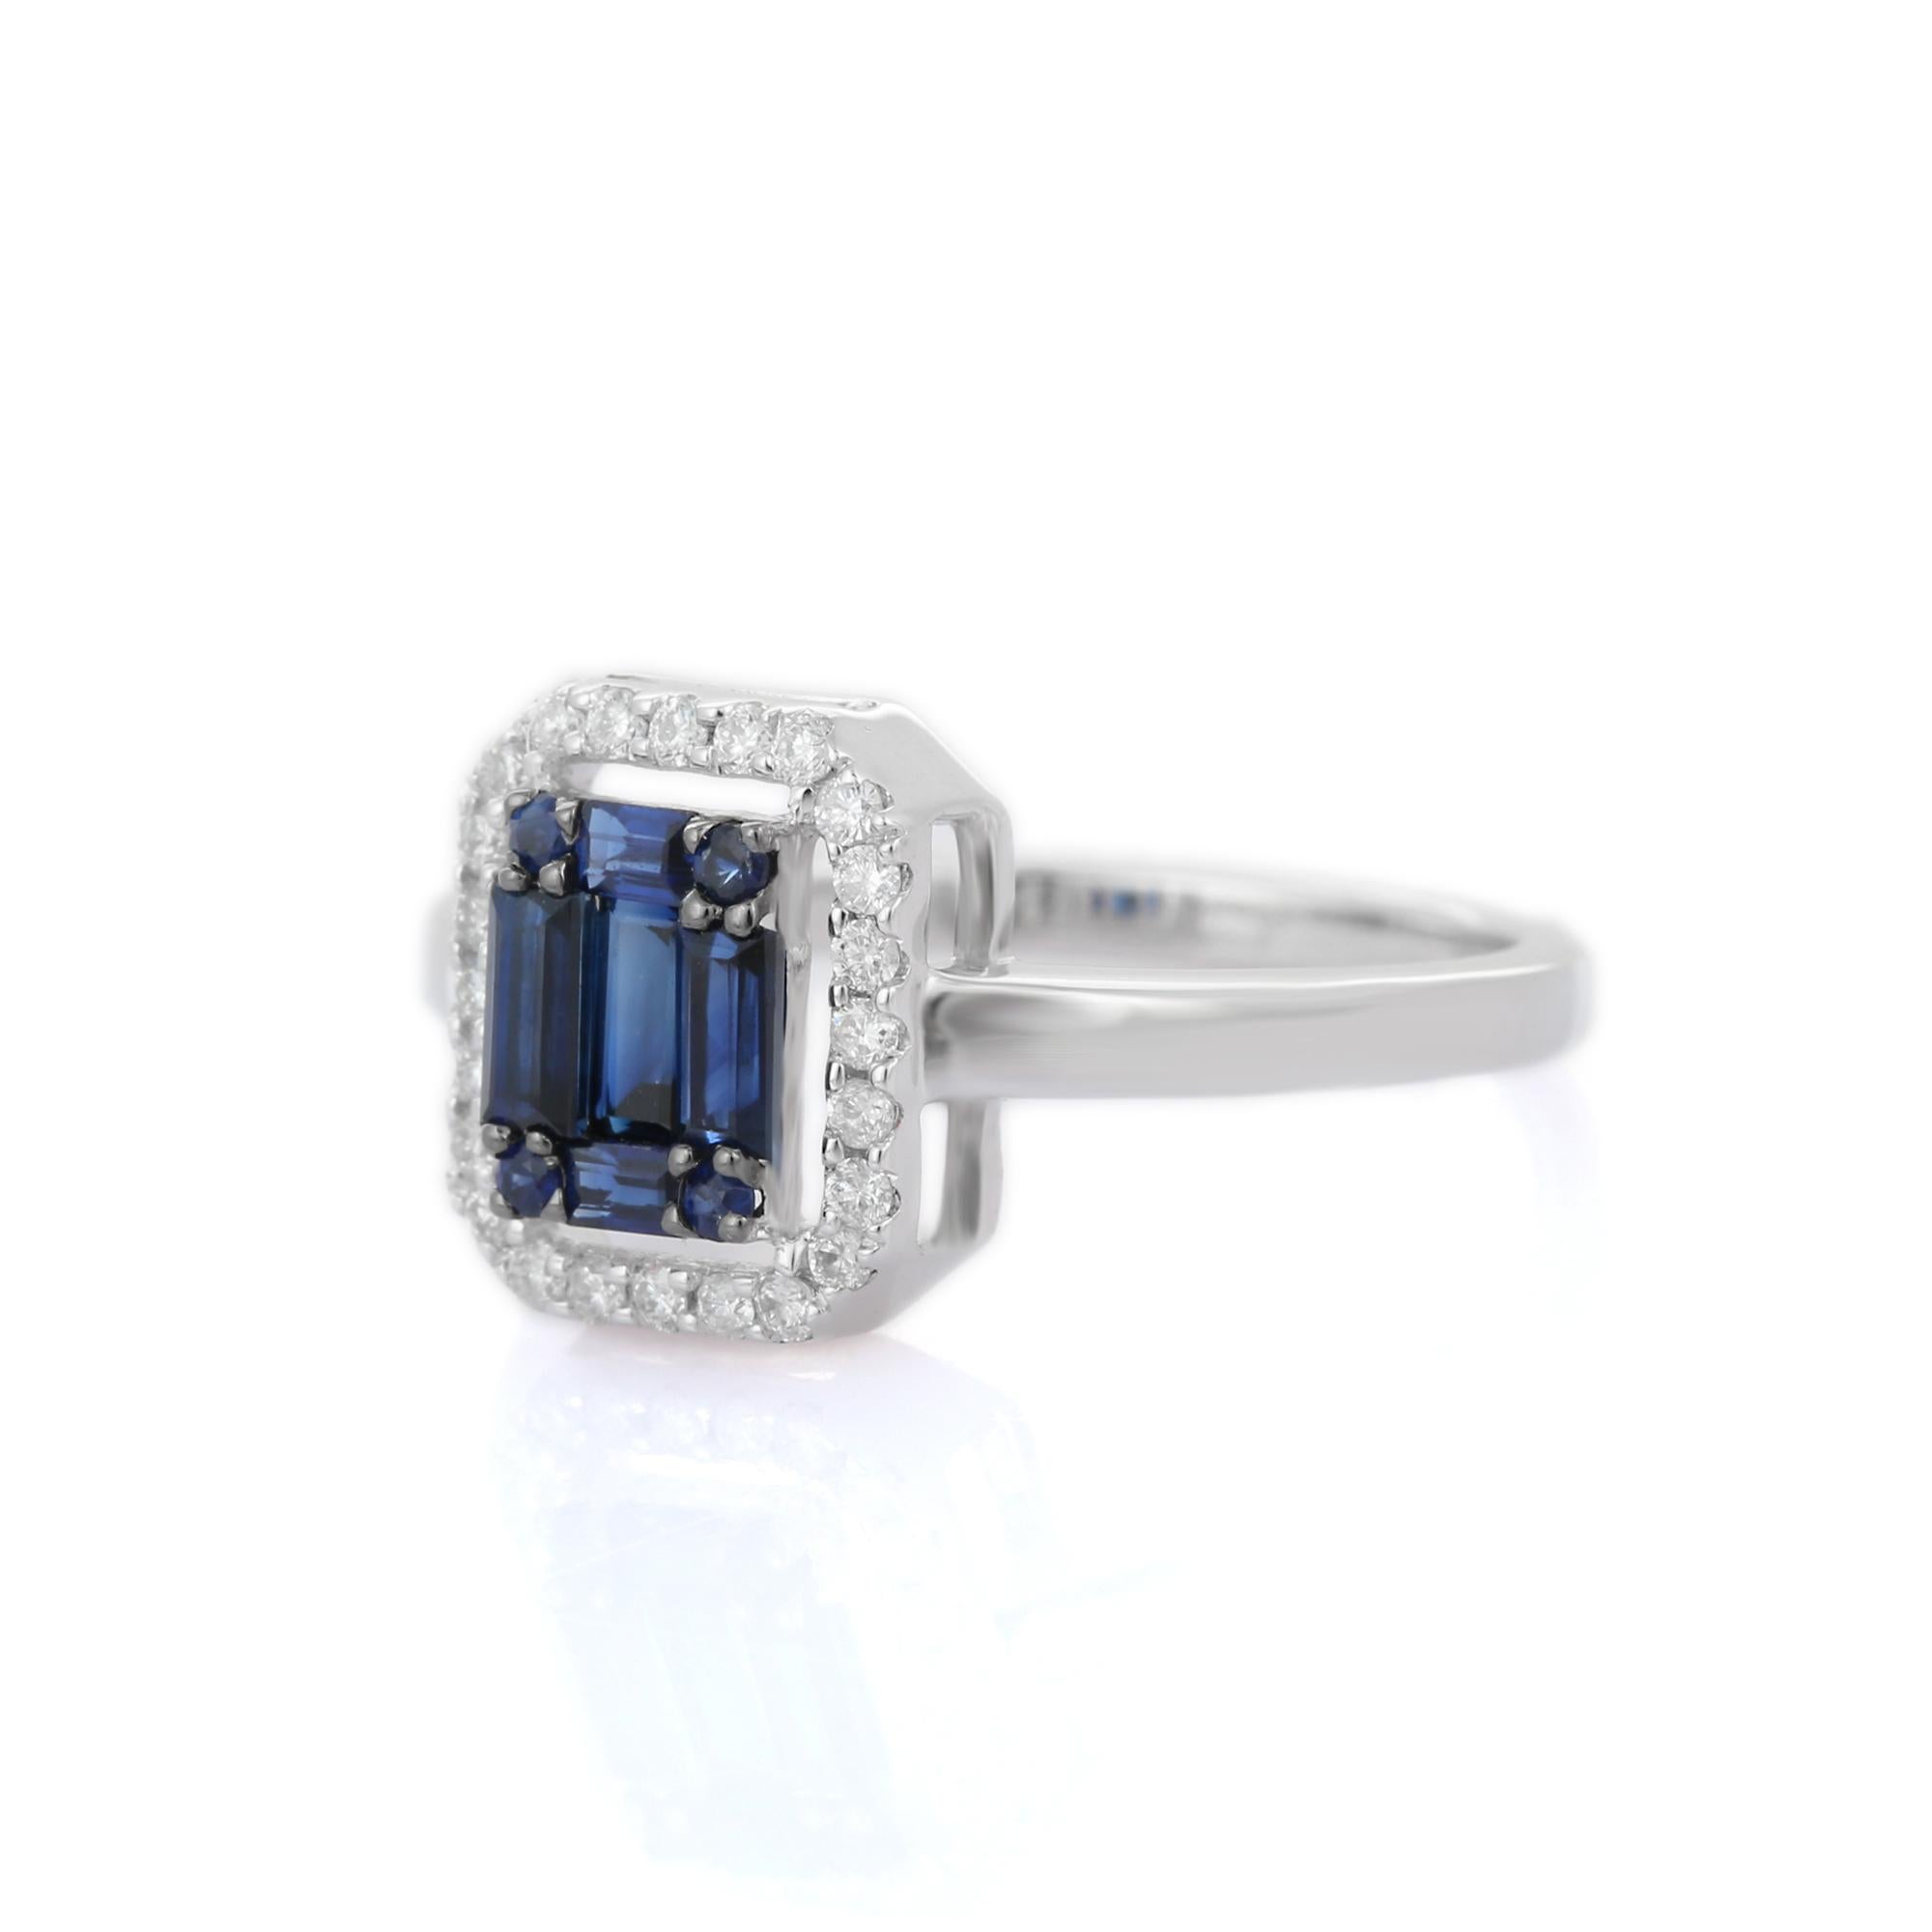 For Sale:  Exquisite Halo Diamond and Sapphire Cluster Ring Studded in 18K White Gold 3